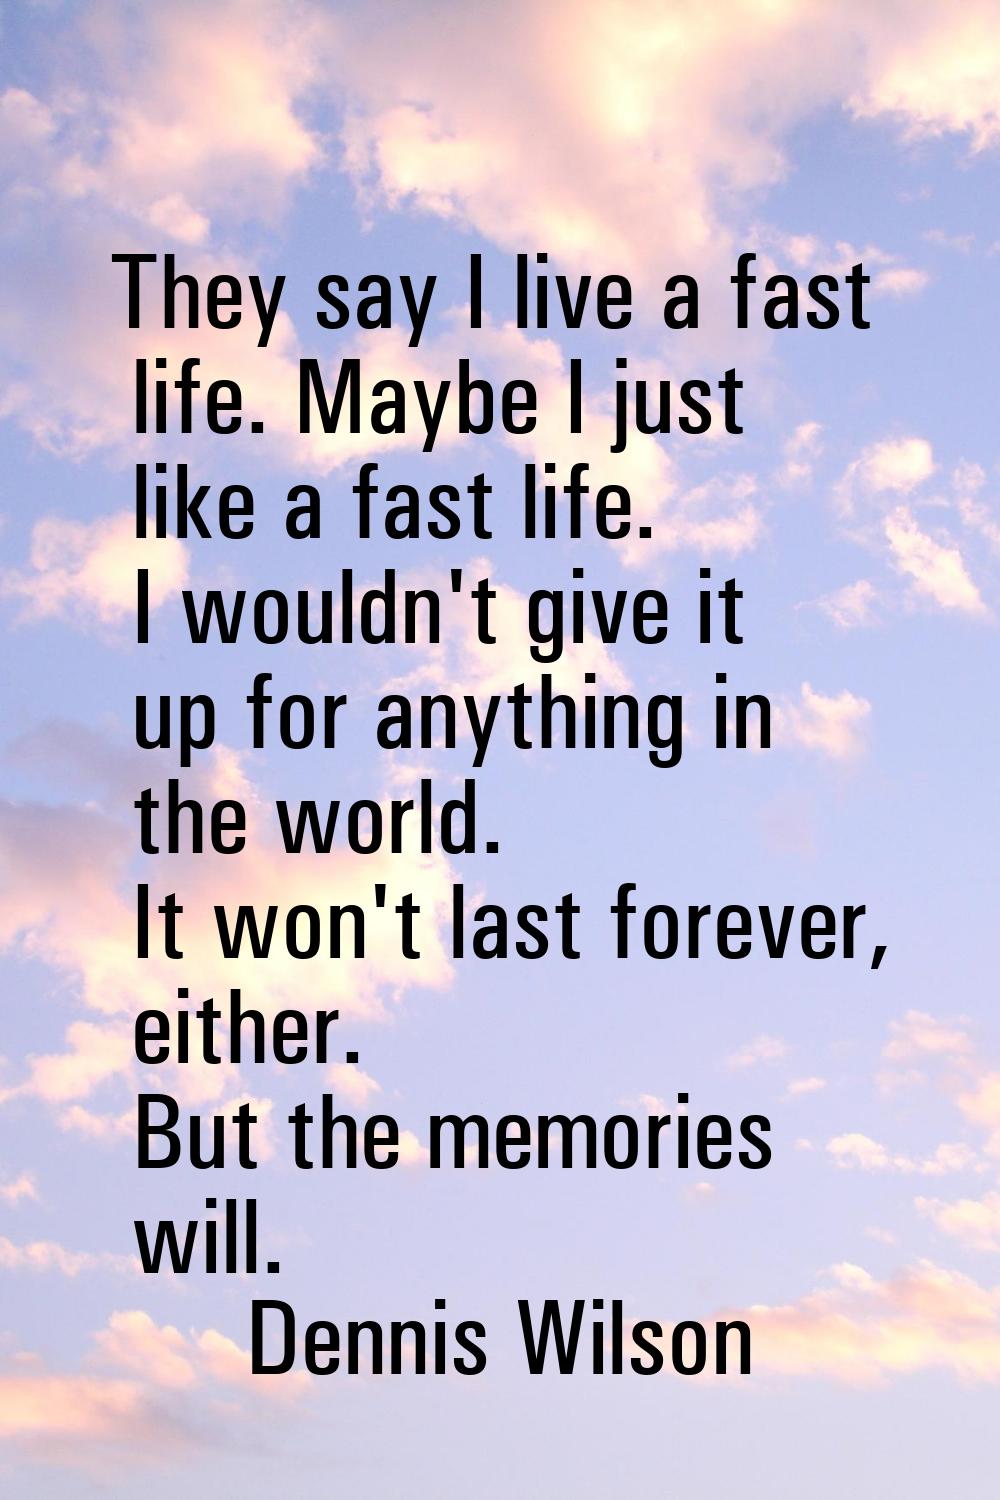 They say I live a fast life. Maybe I just like a fast life. I wouldn't give it up for anything in t